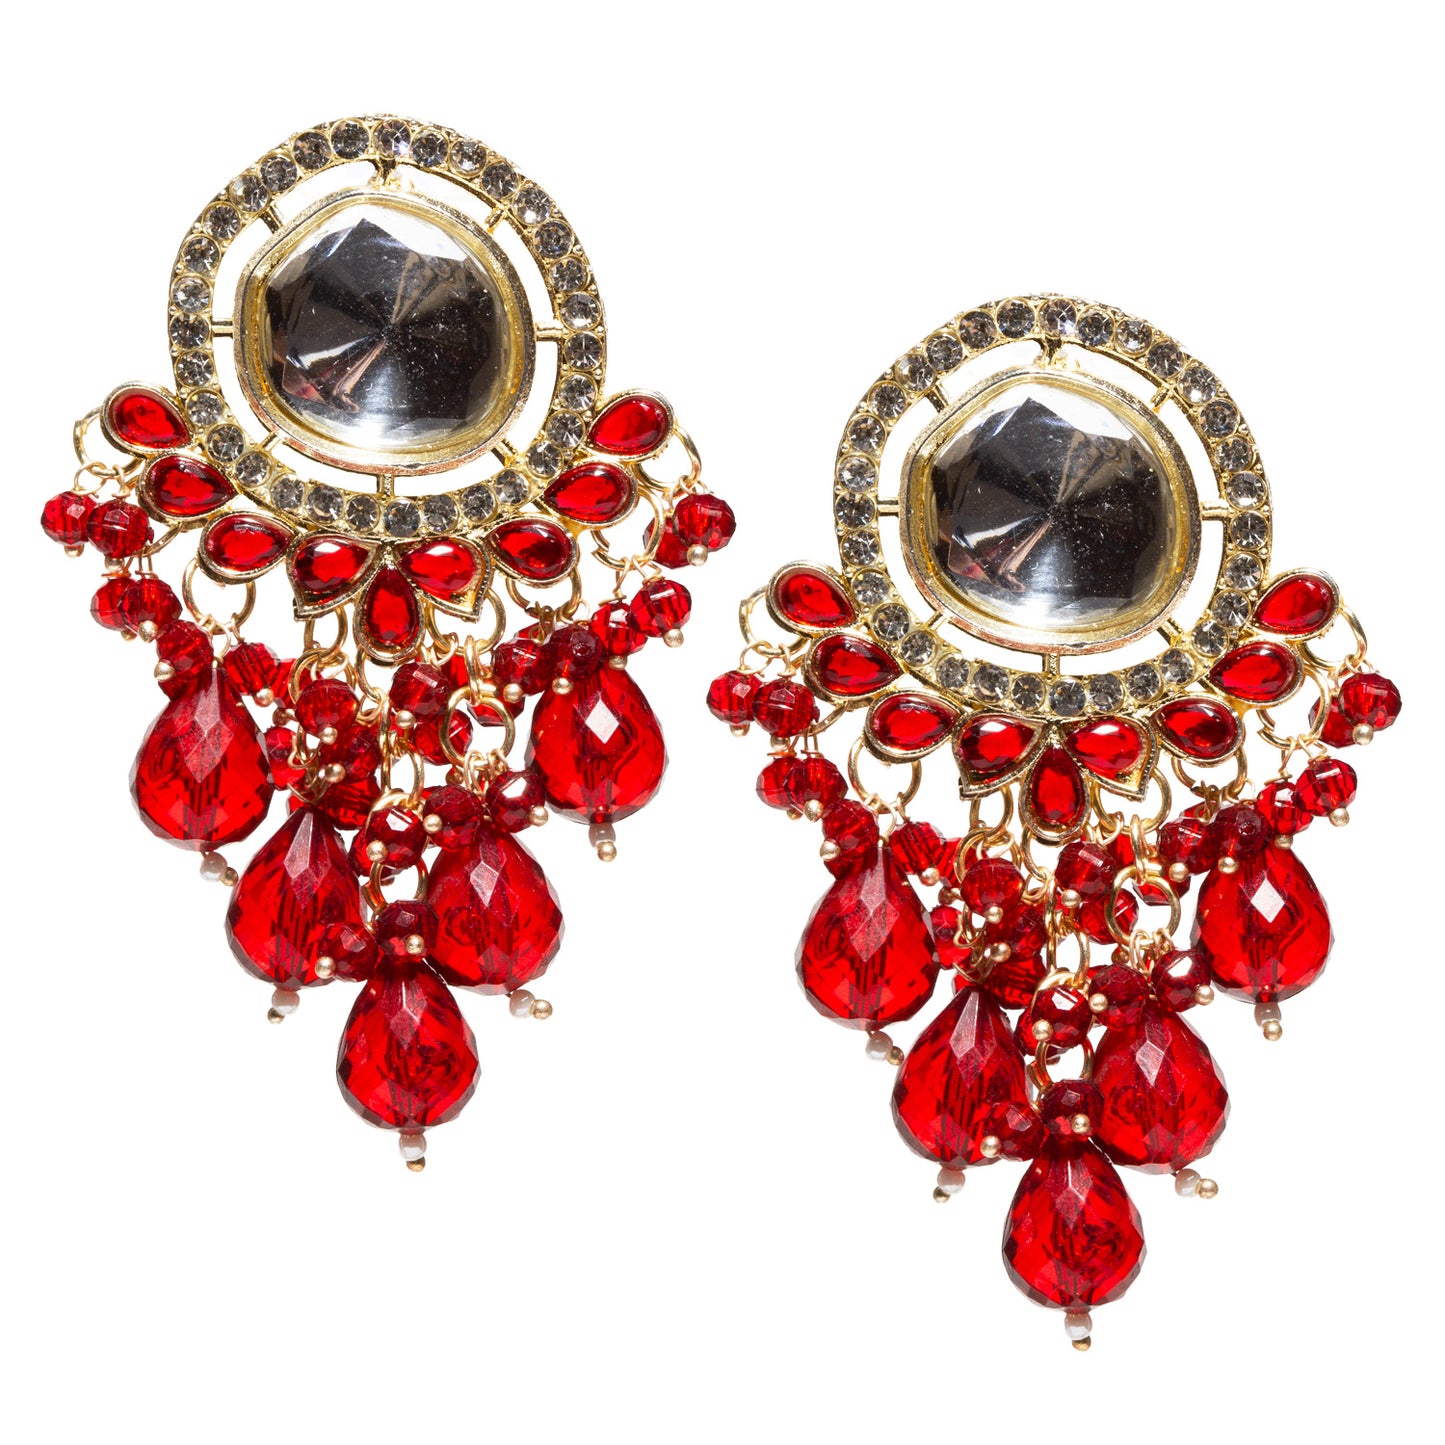 Bindhani-Gold-Plated-CZ-Stone-Maroon-Drop-Earrings-For-Women-and-Girls